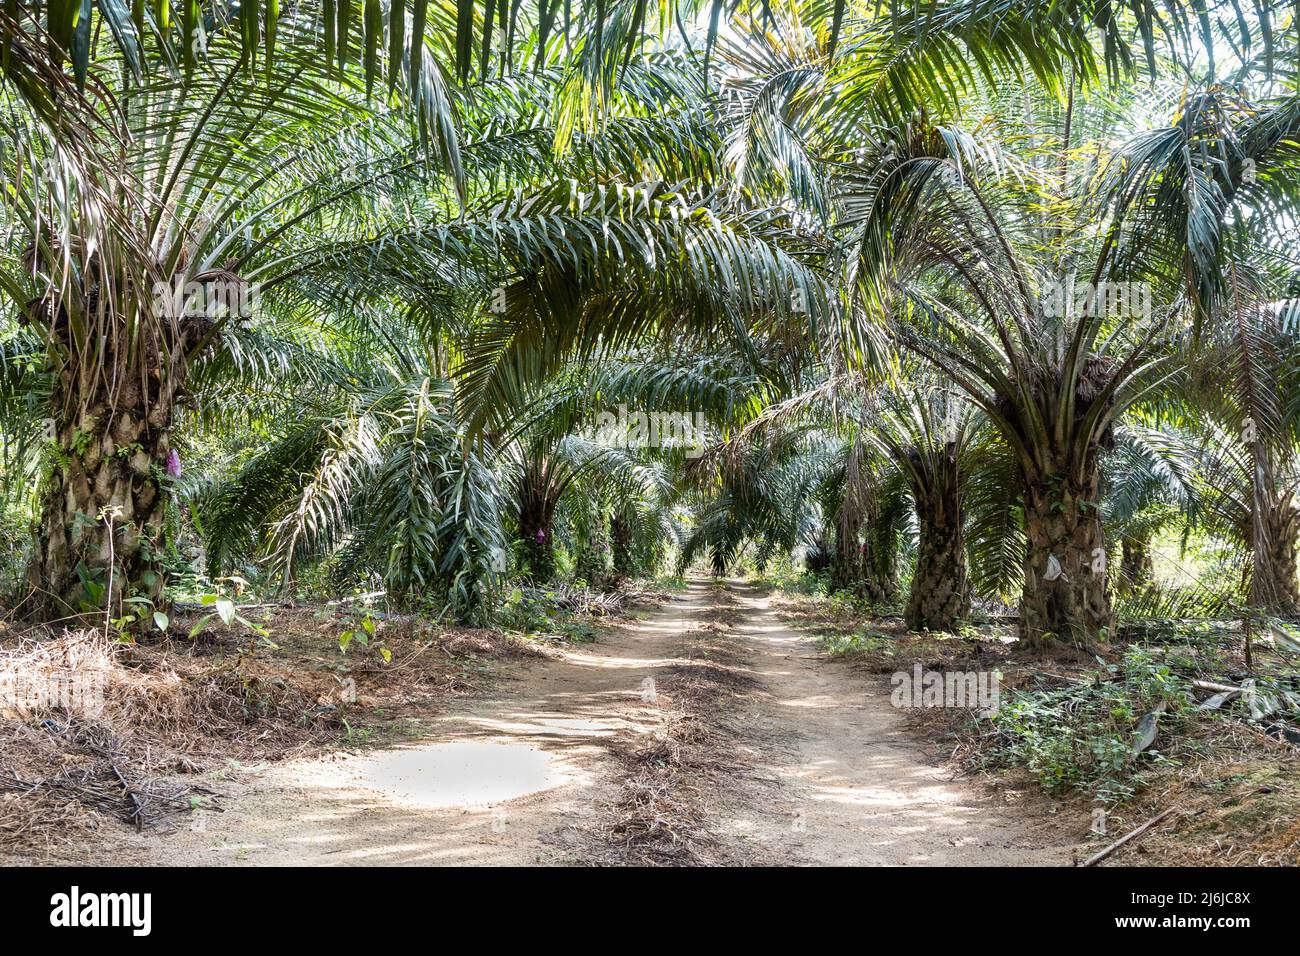 Road leading to oil palm plantation with oil palm trees on both sides of road Stock Photo